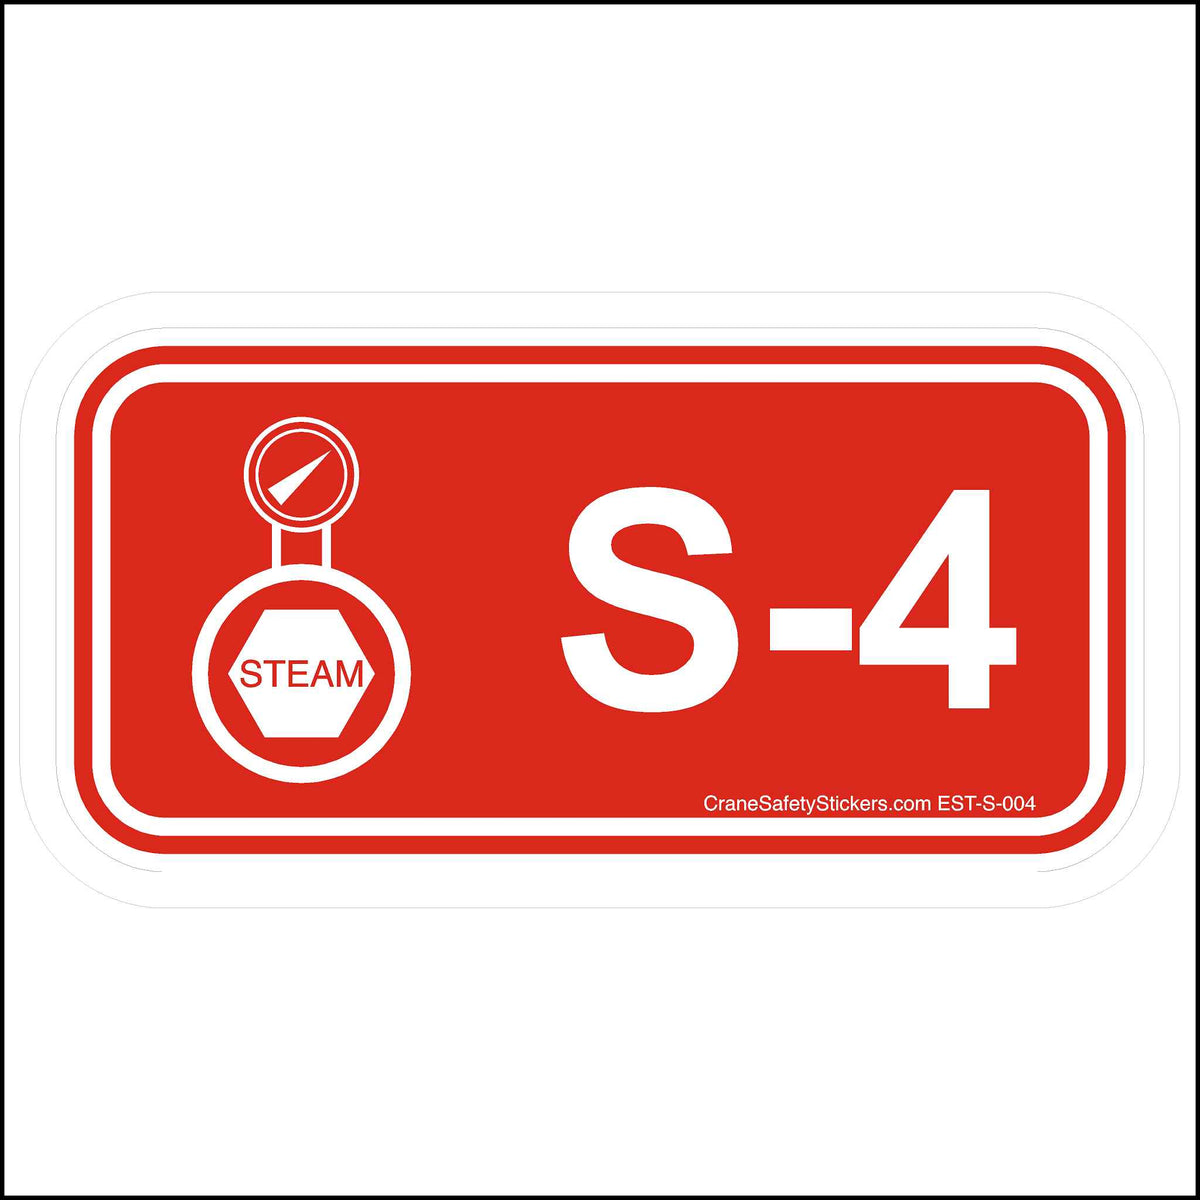 Energy Control Program Steam Disconnect Stickers S-4.